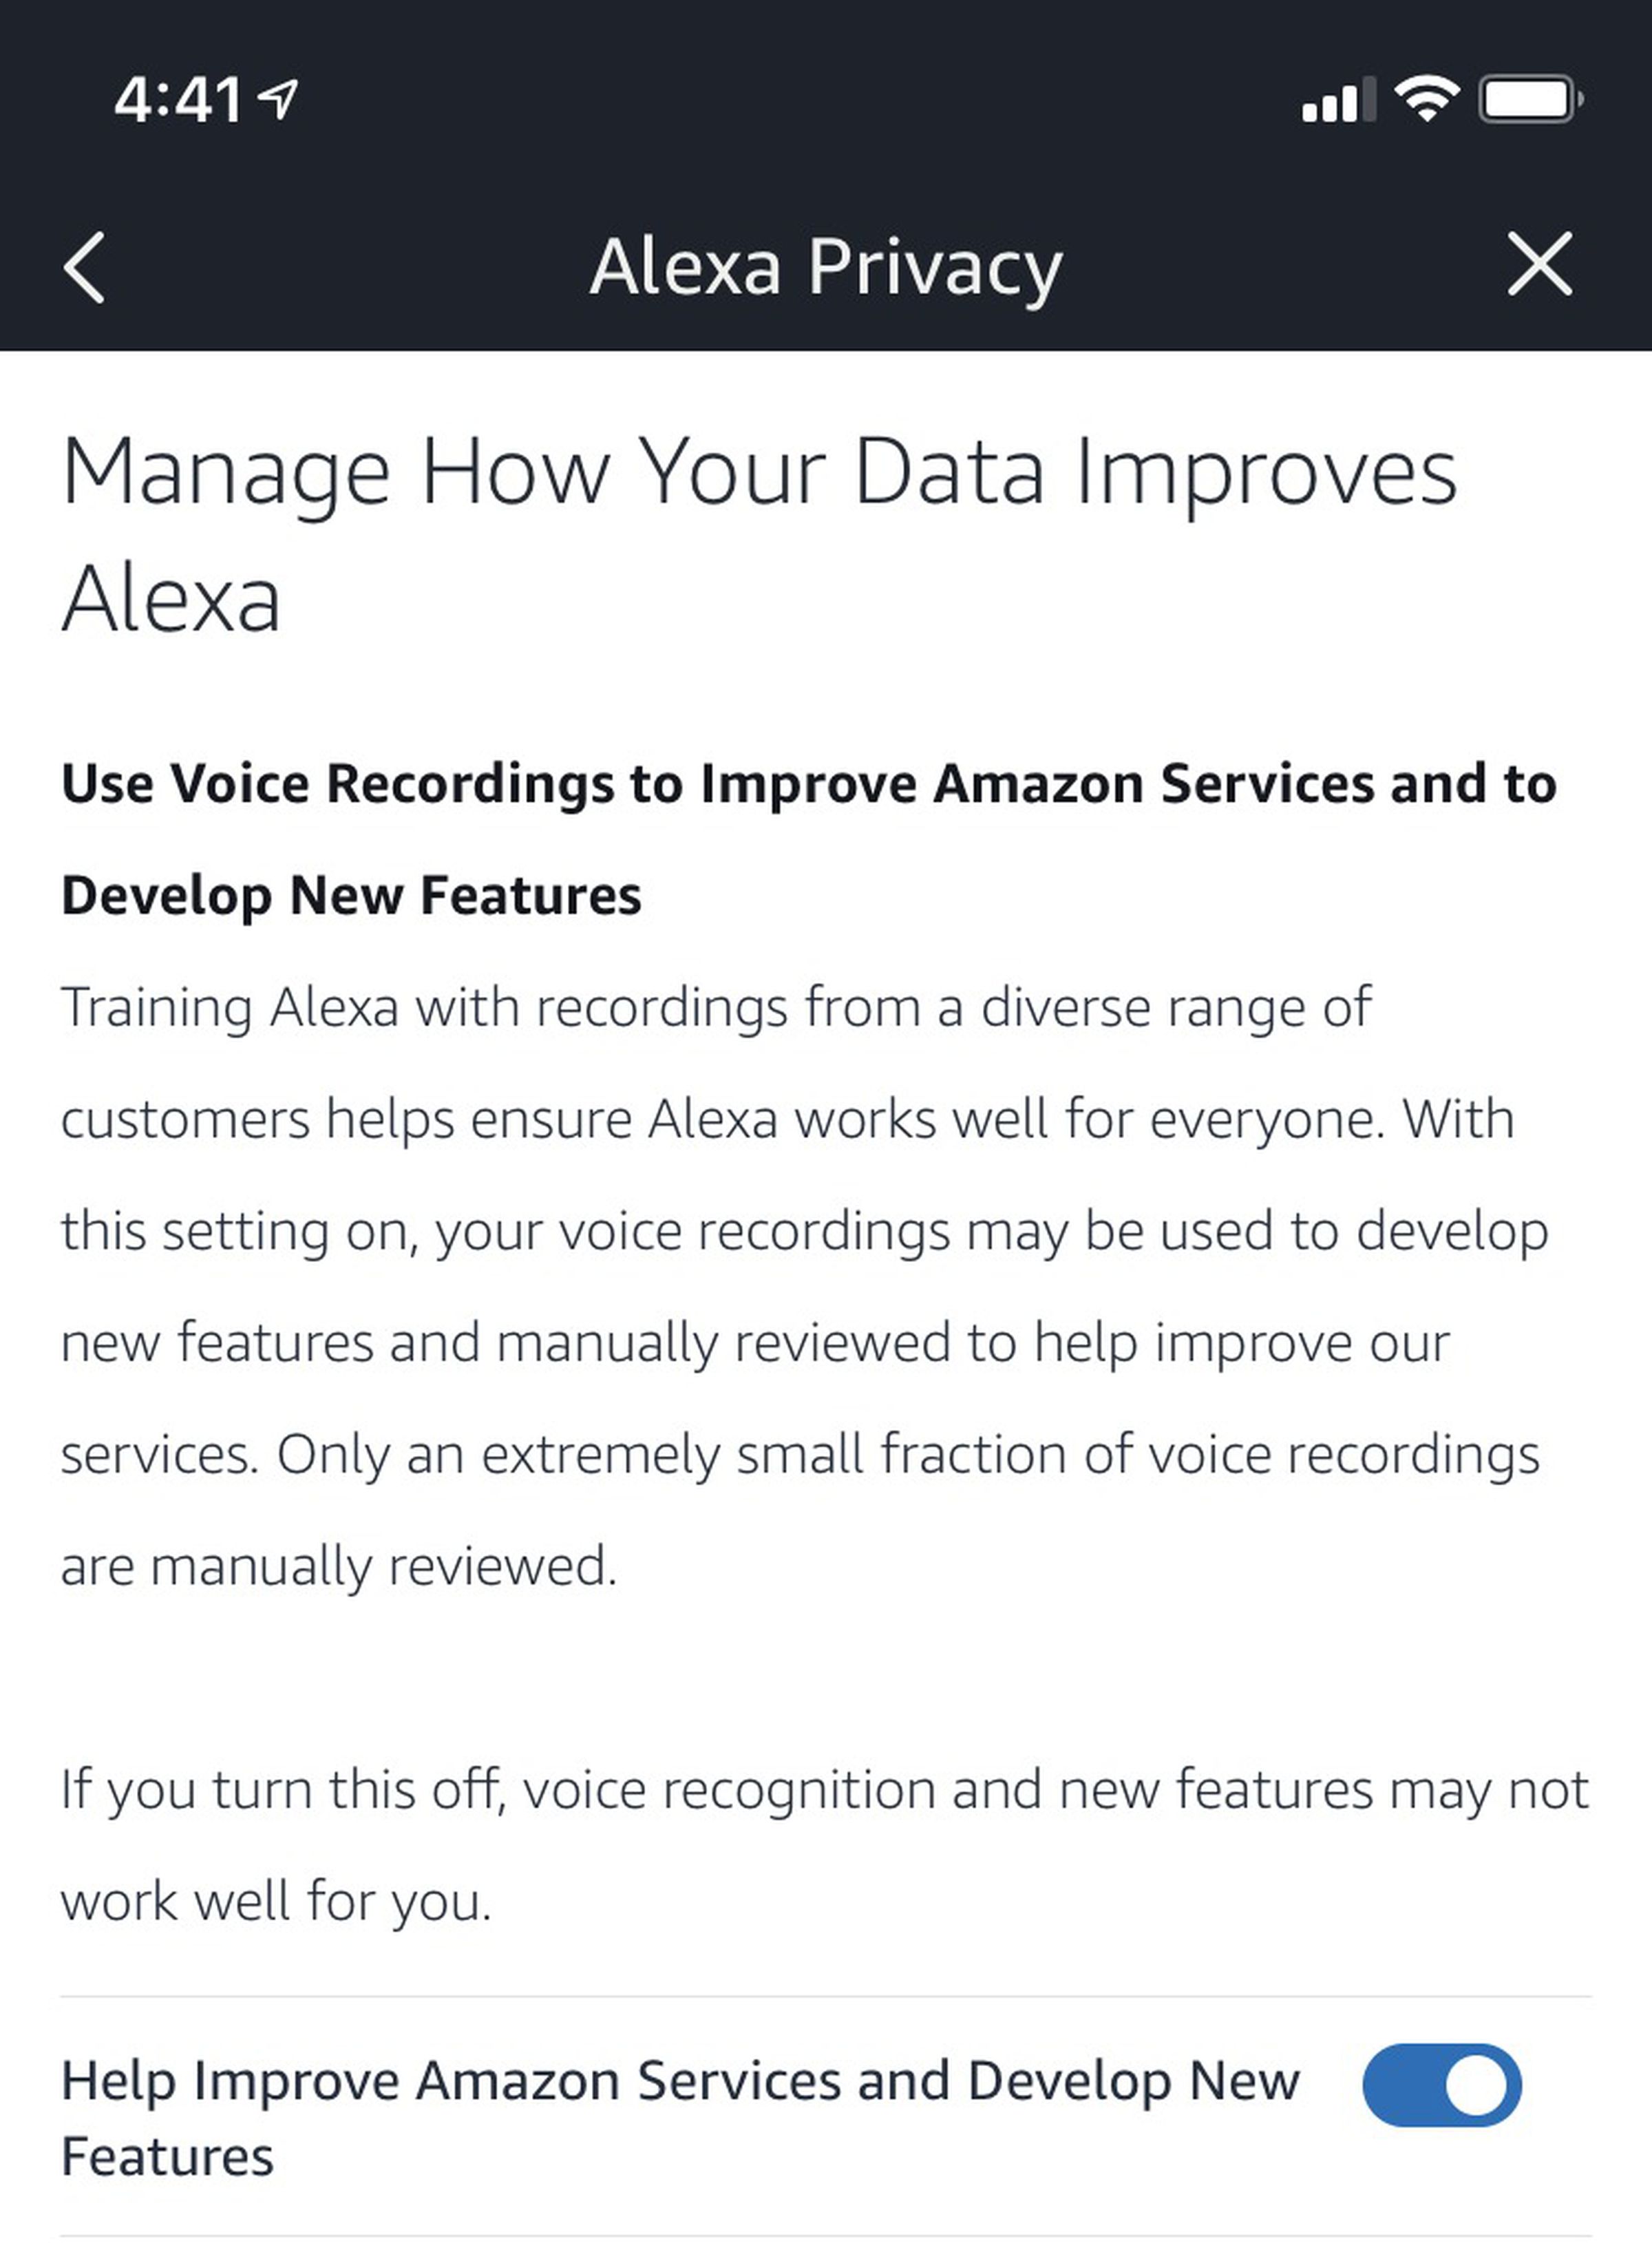 Amazon’s new language now specifies your voice could be “manually reviewed” if you don’t turn off this feature.